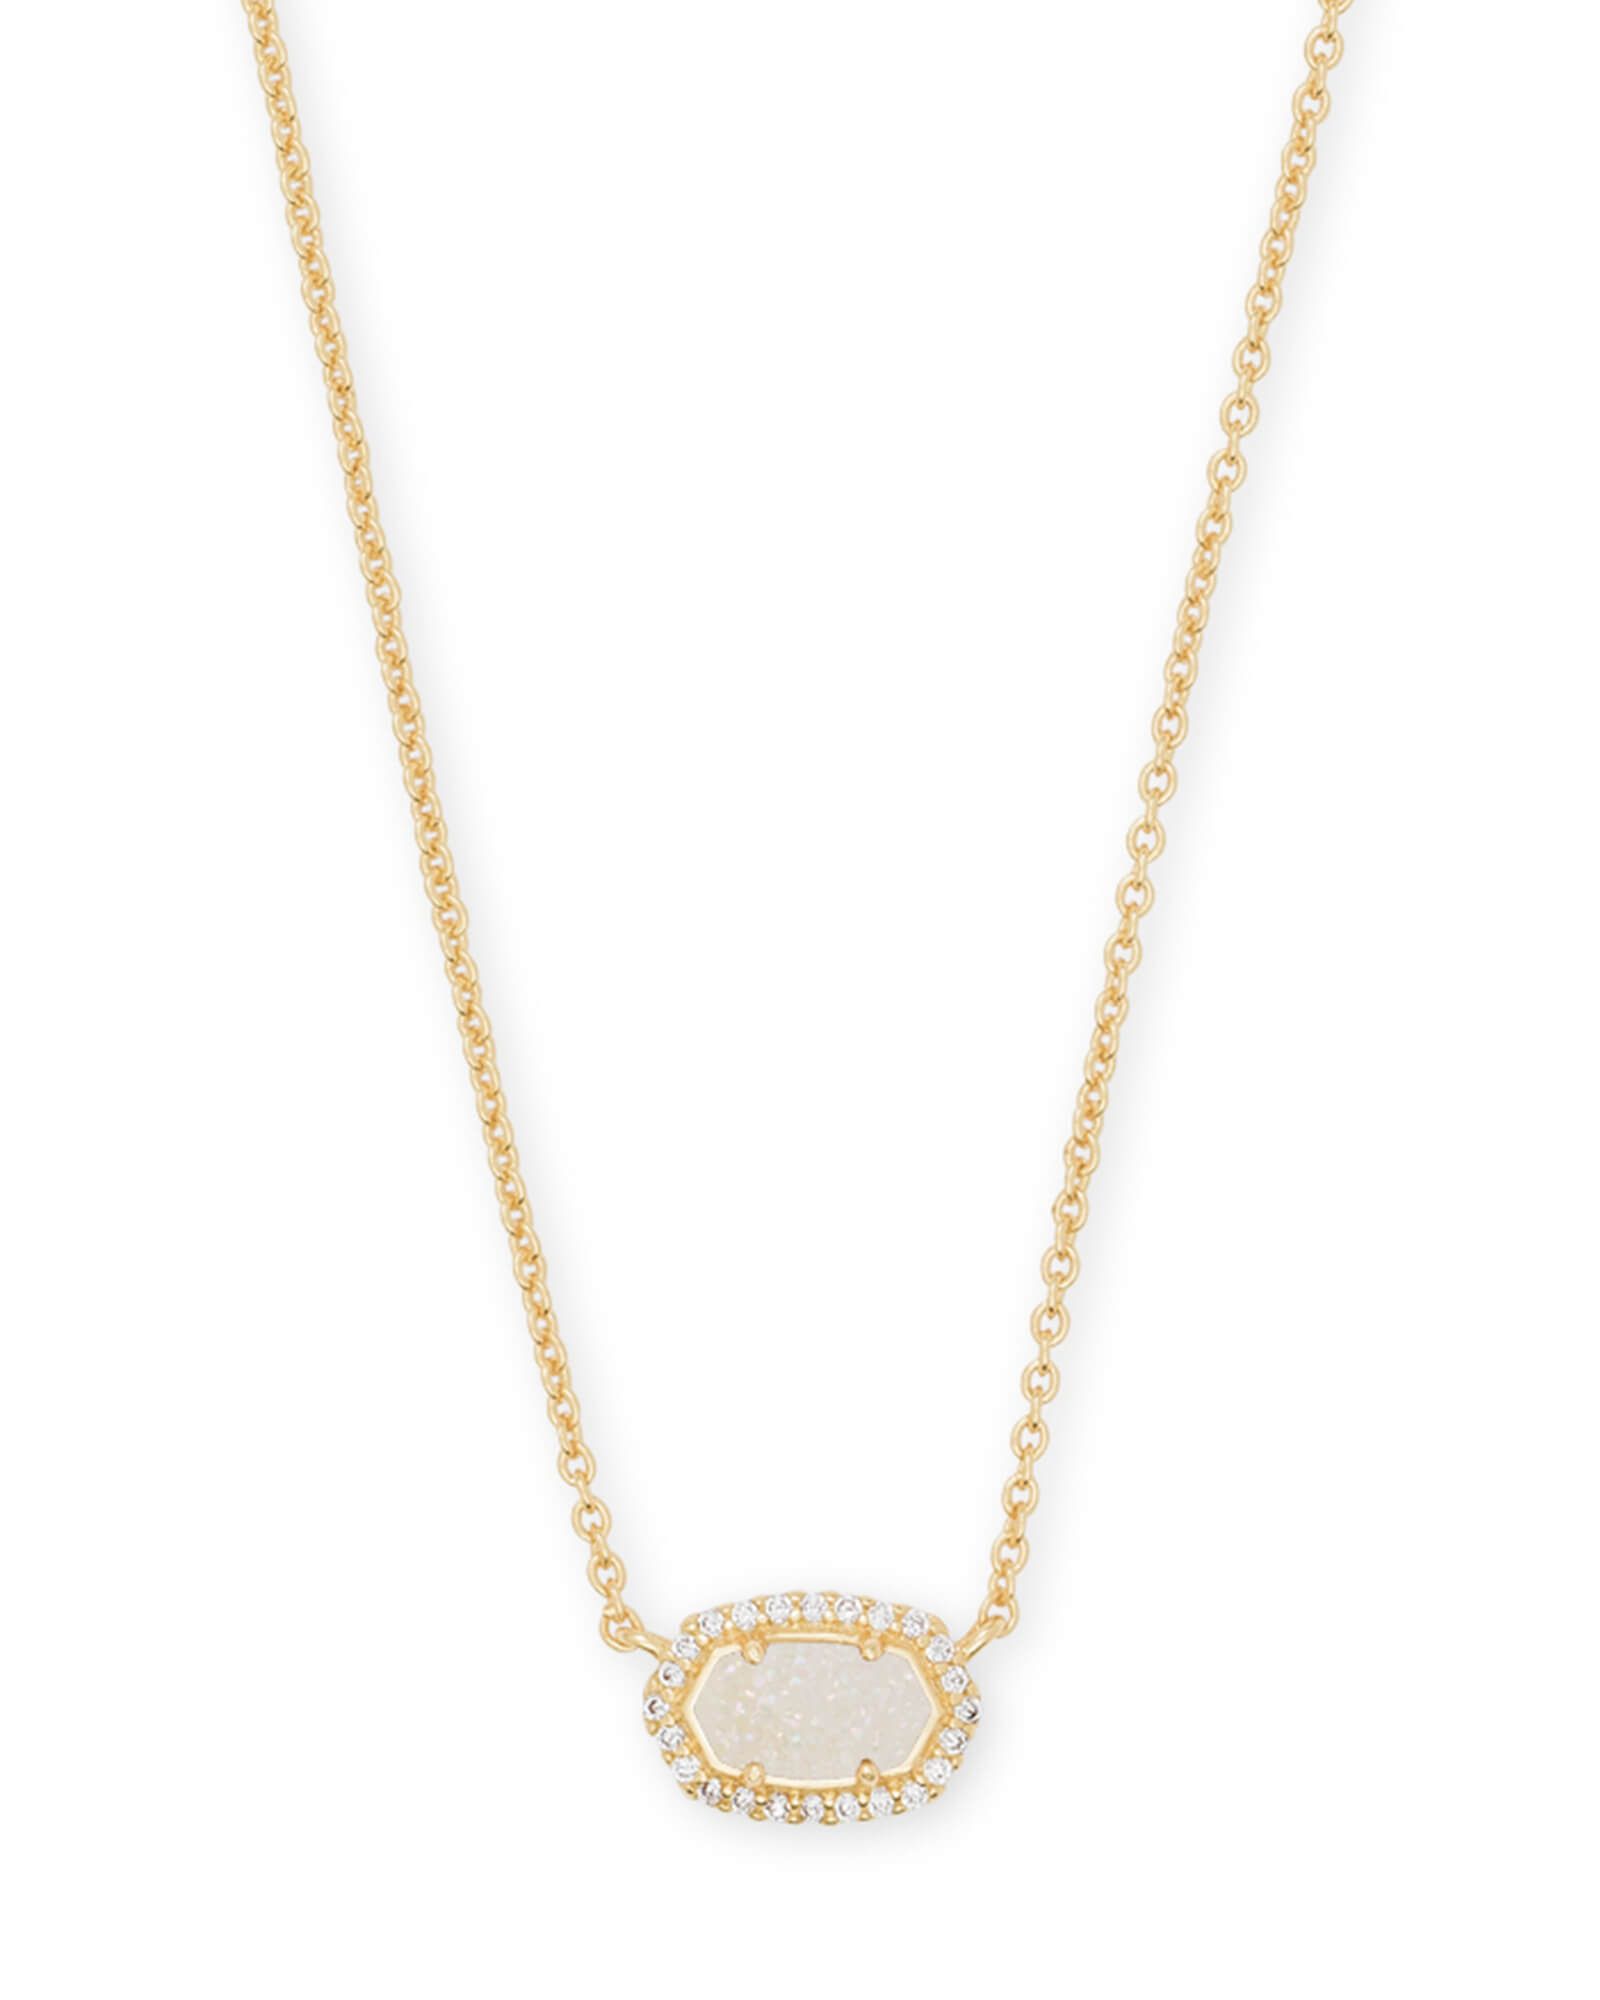 Chelsea Gold Pendant Necklace In Iridescent Drusy | Kendra Scott With Regard To Most Recent Sparkling Square Halo Pendant Necklaces (View 6 of 25)